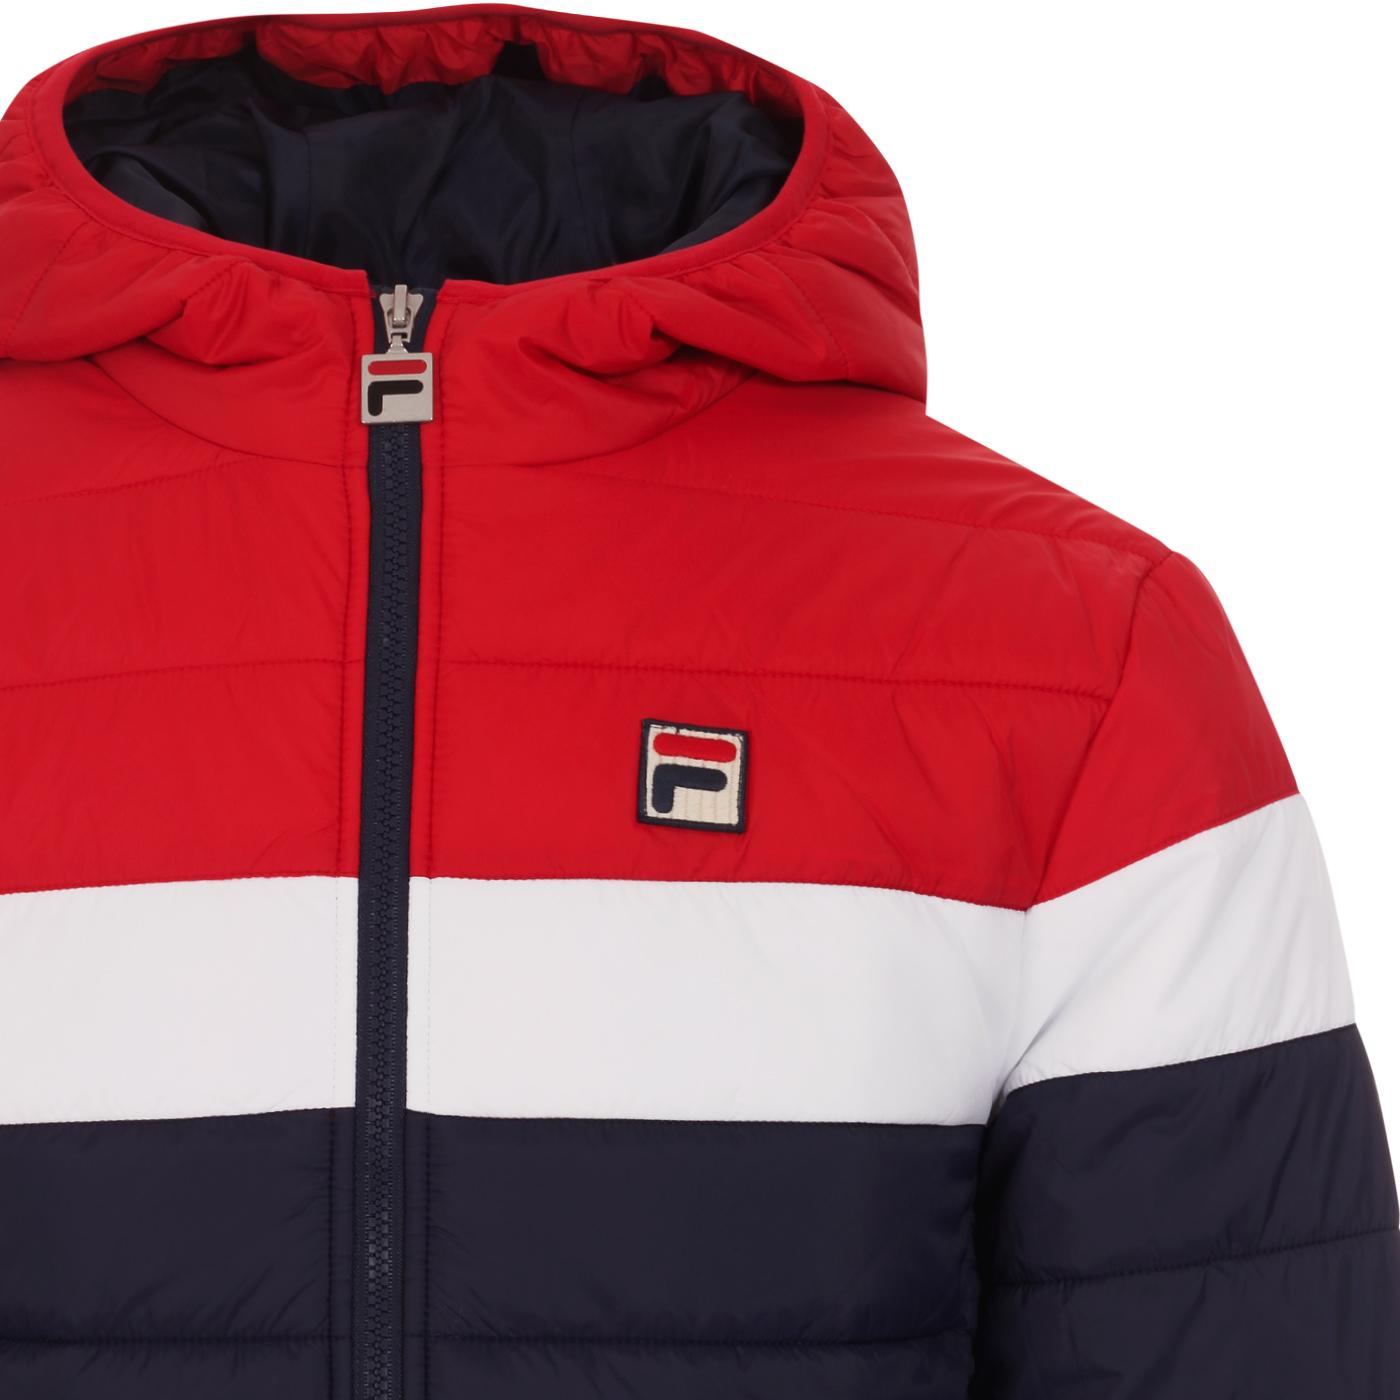 fila padded jacket with buckle fastening and chest logo